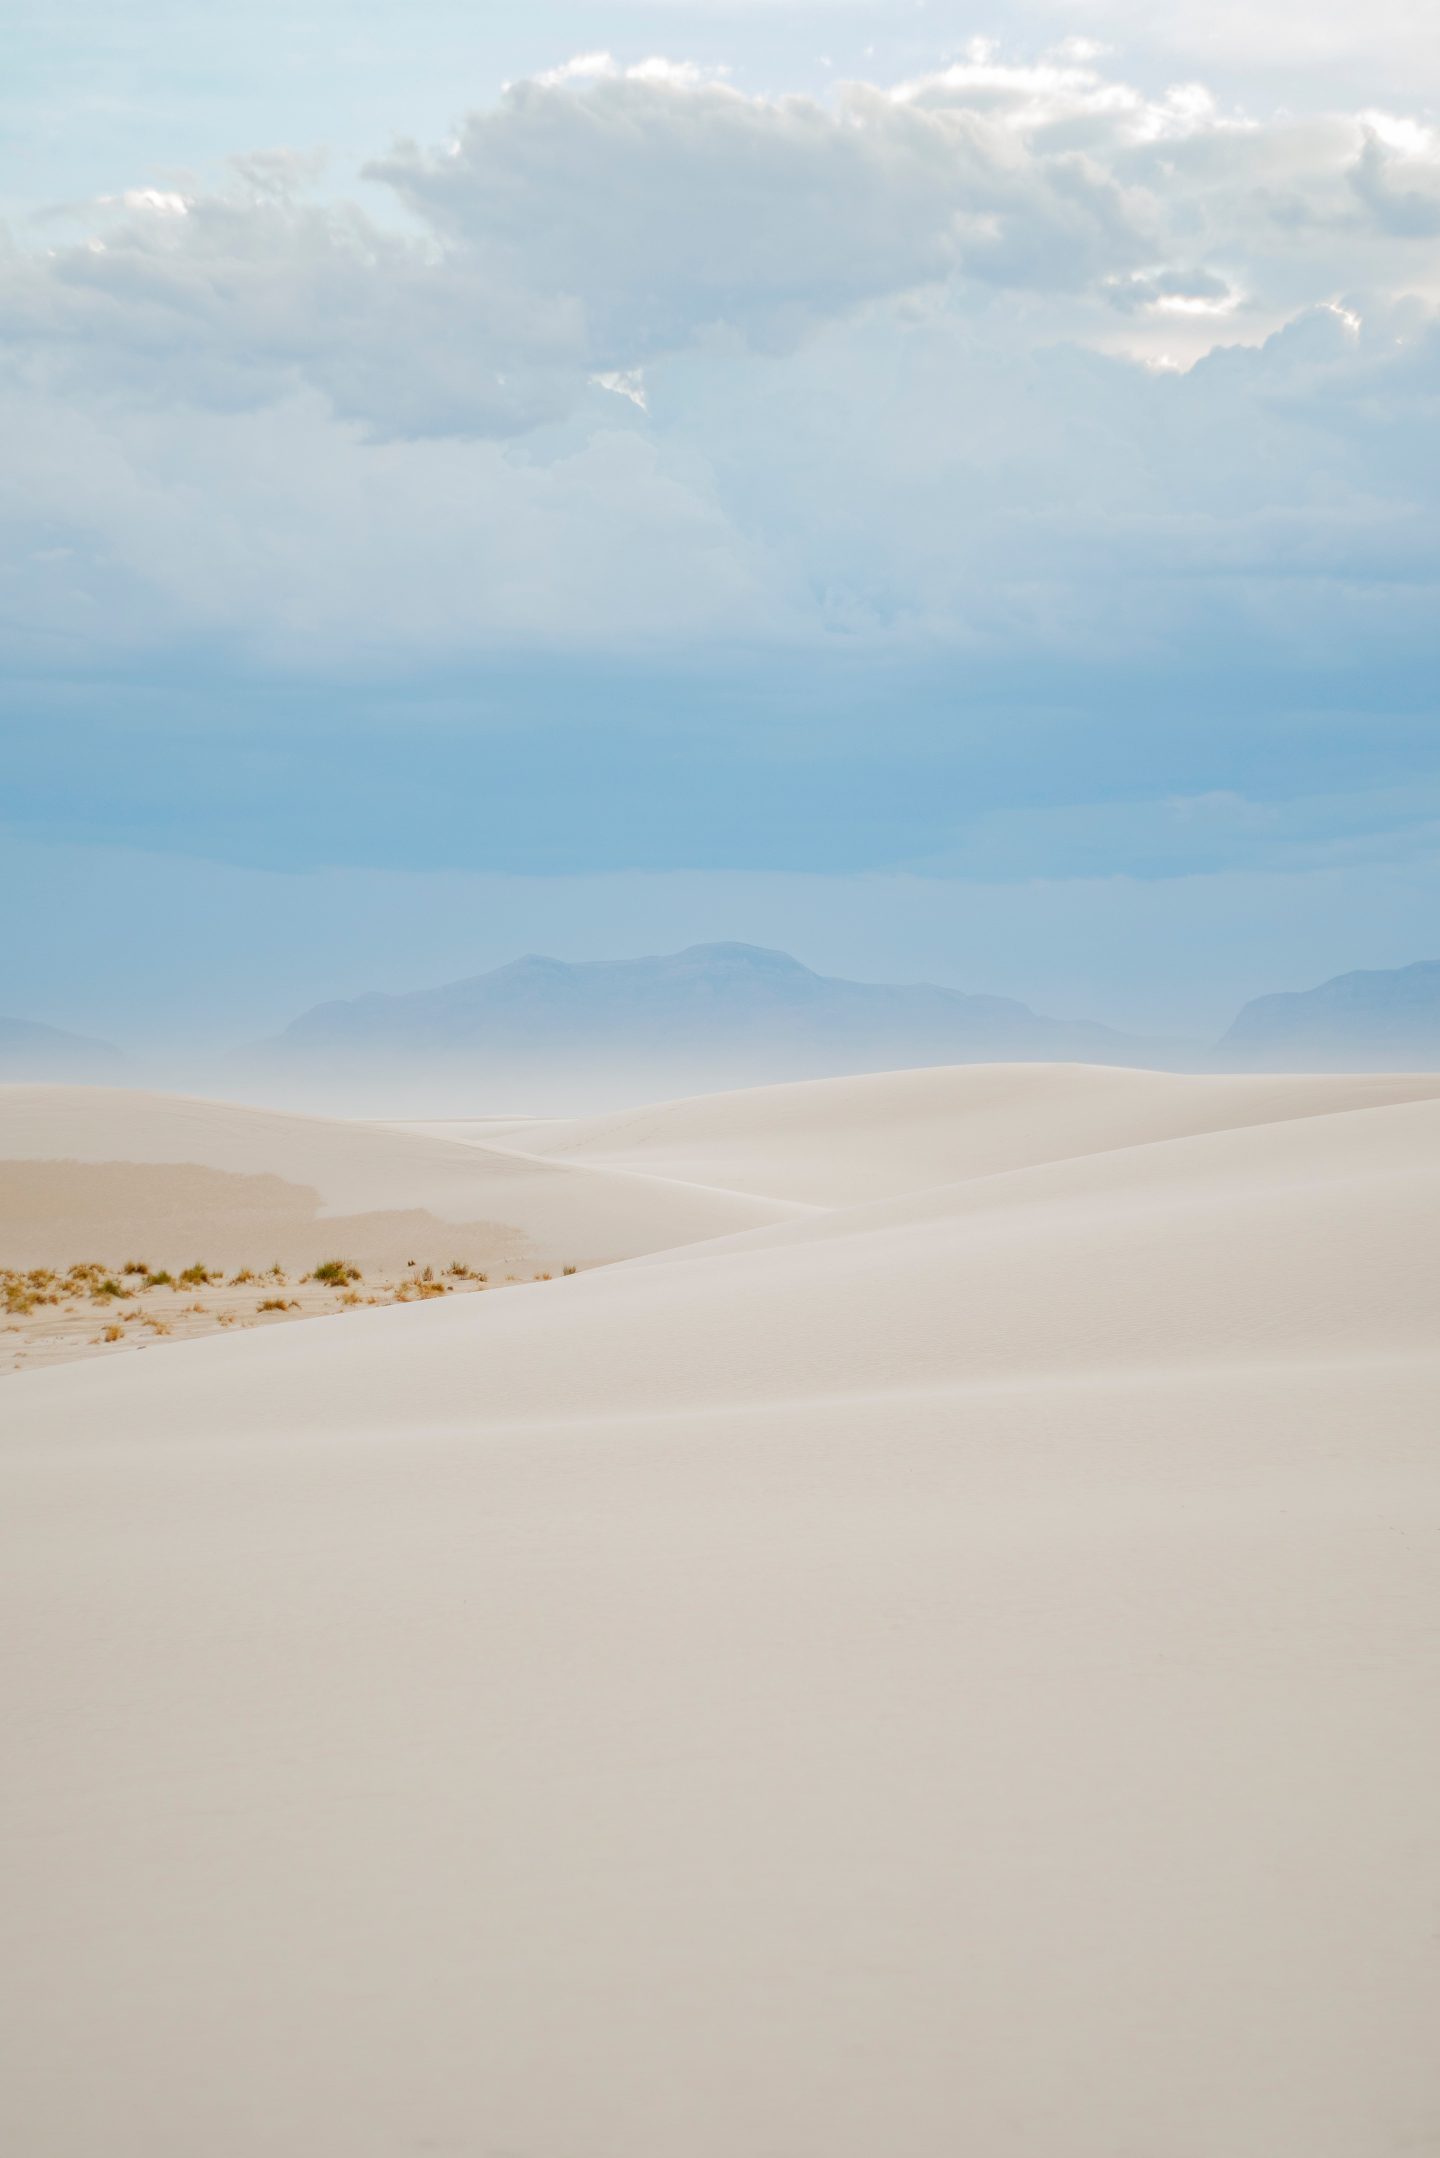 White Sands National Park near Alamogordo, New Mexico is in my top 10 favorite beautiful places in the US to visit.